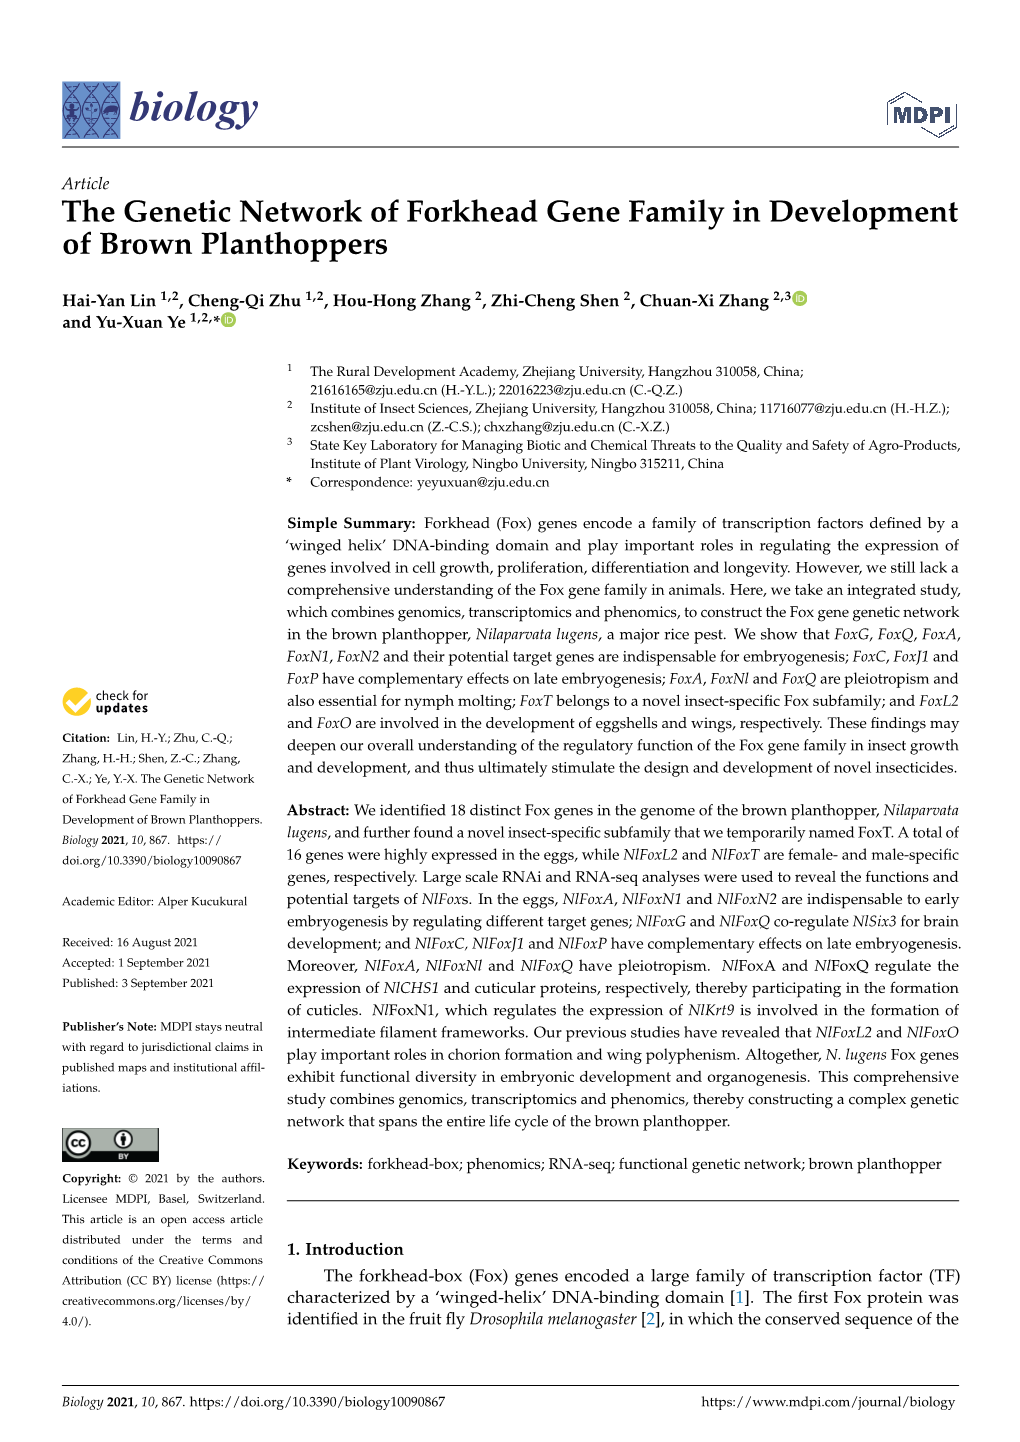 The Genetic Network of Forkhead Gene Family in Development of Brown Planthoppers